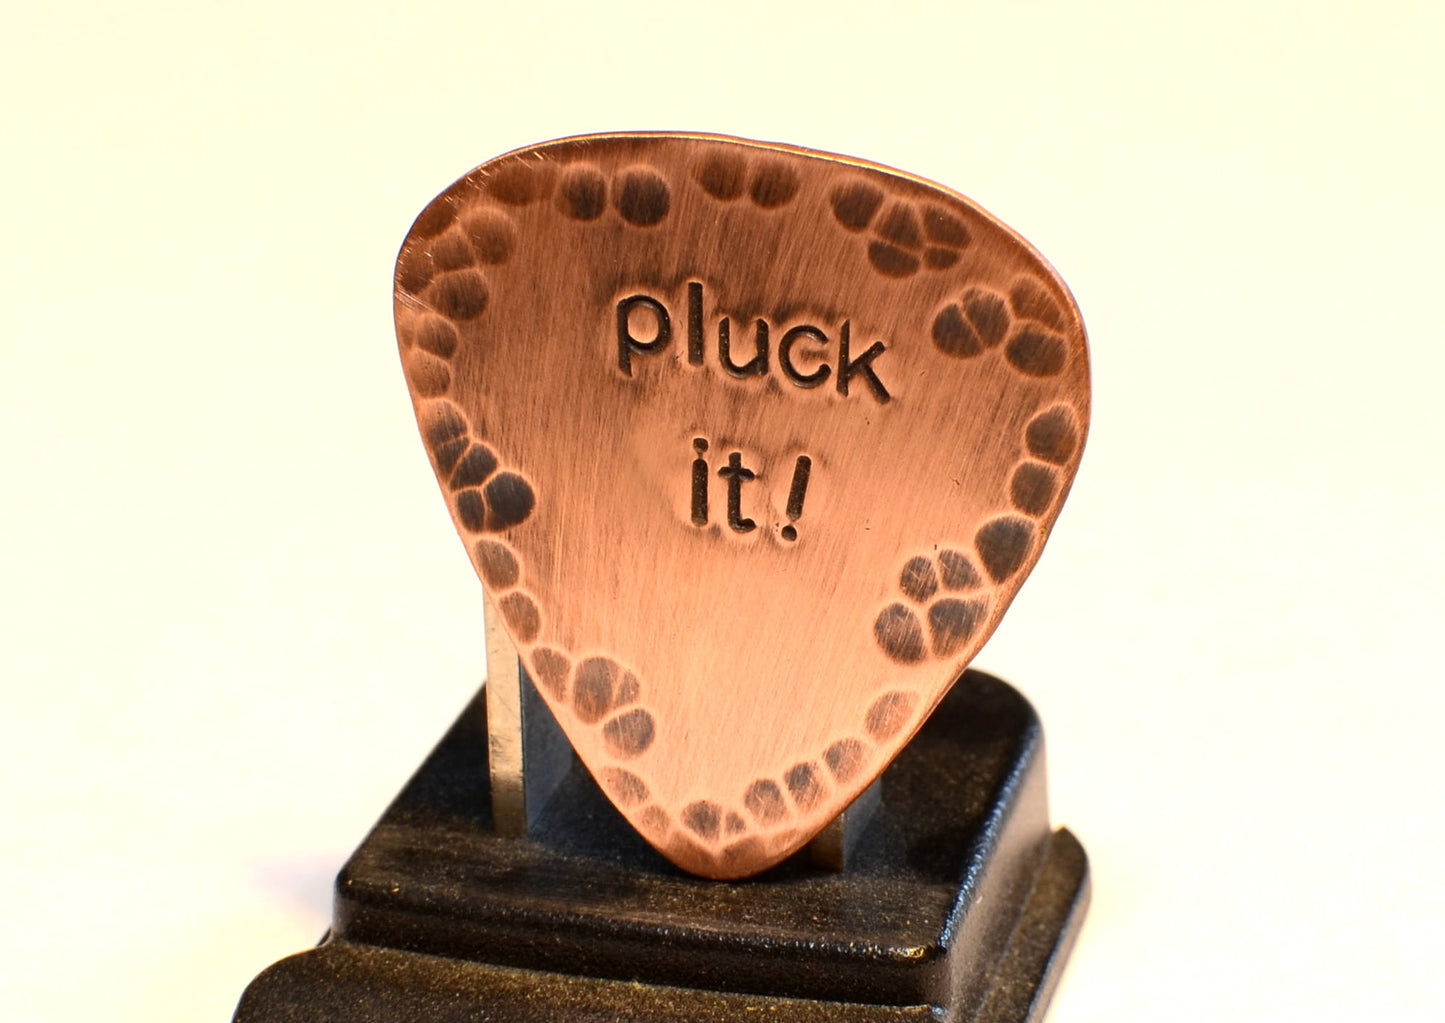 Rustic Pluck It Copper Guitar Pick with Patina and Hammered Finish